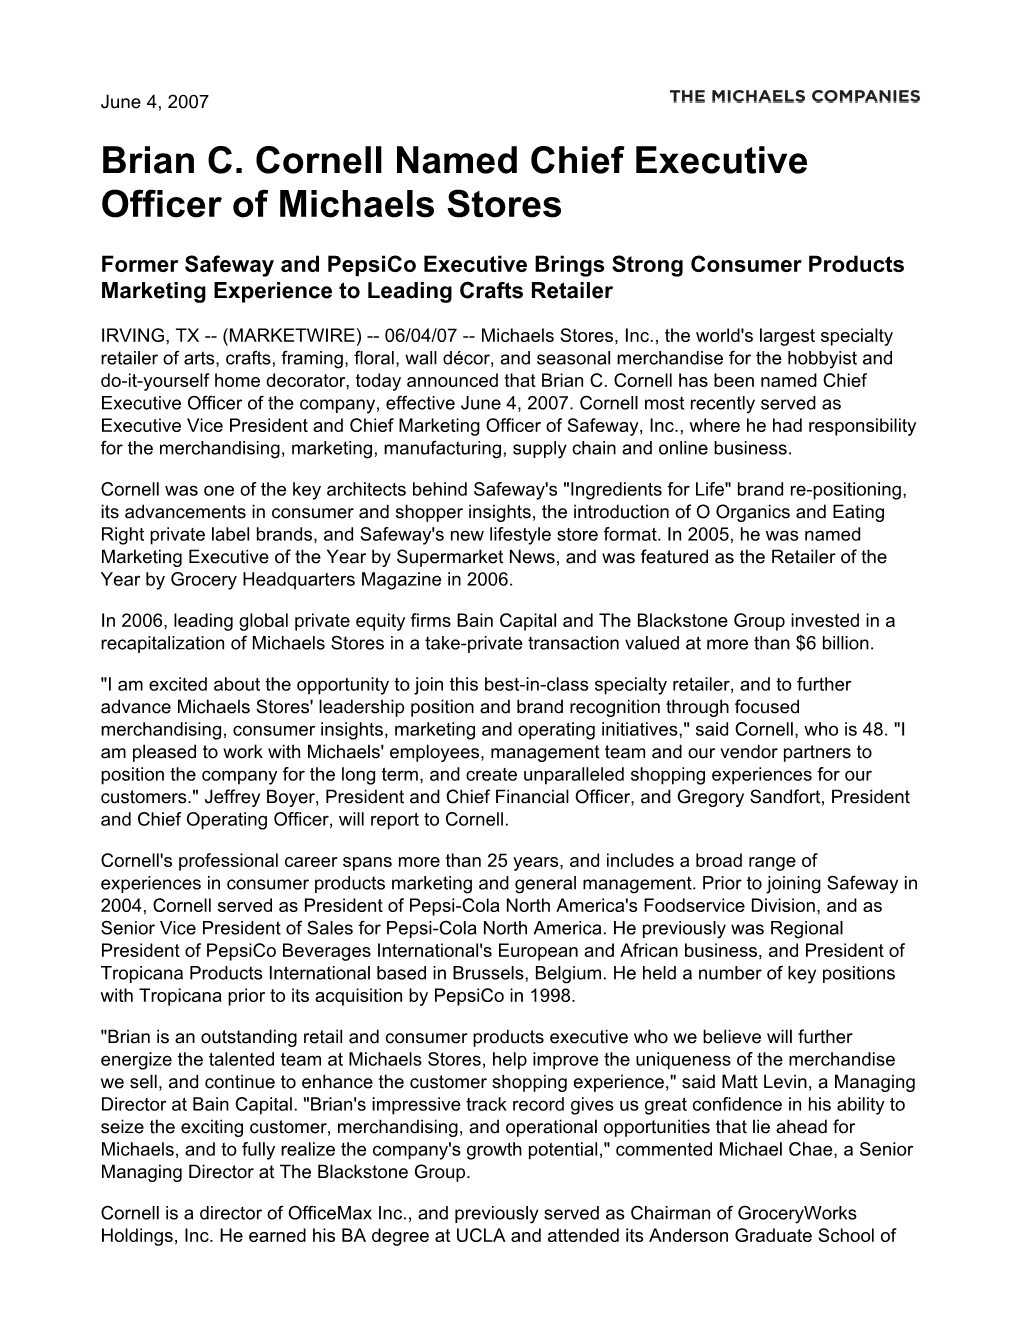 Brian C. Cornell Named Chief Executive Officer of Michaels Stores